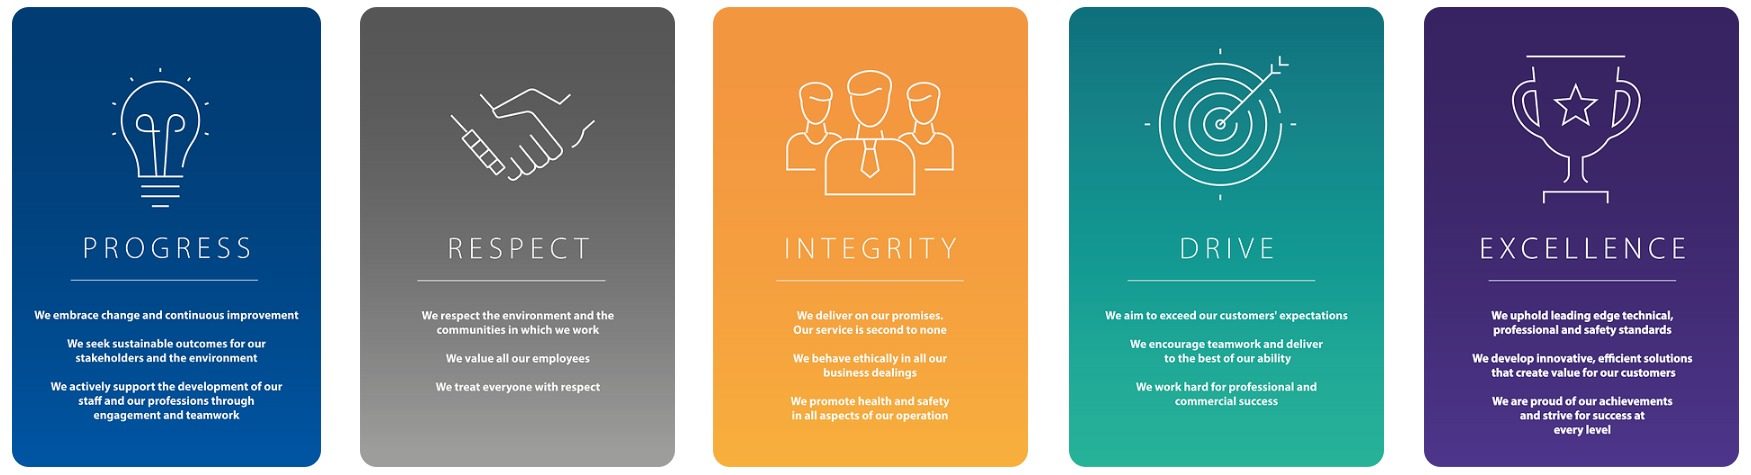 Company Image (Canham Consulting: Our Values)